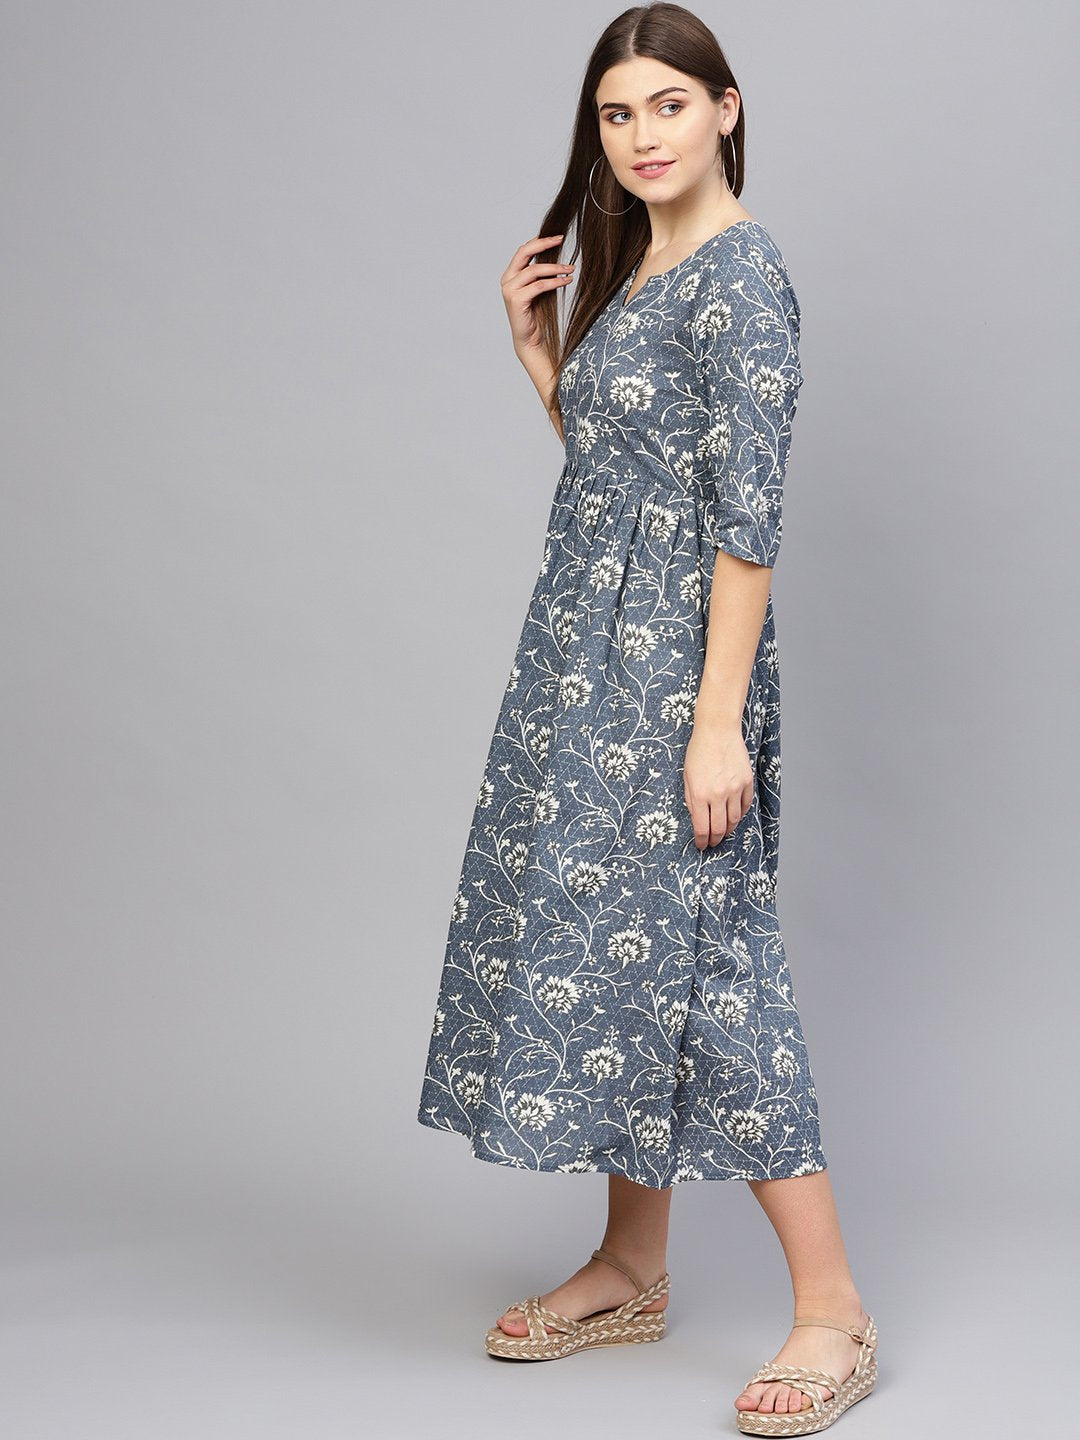 Women's Navy Blue & Off-White Printed A-Line Dress - Nayo Clothing